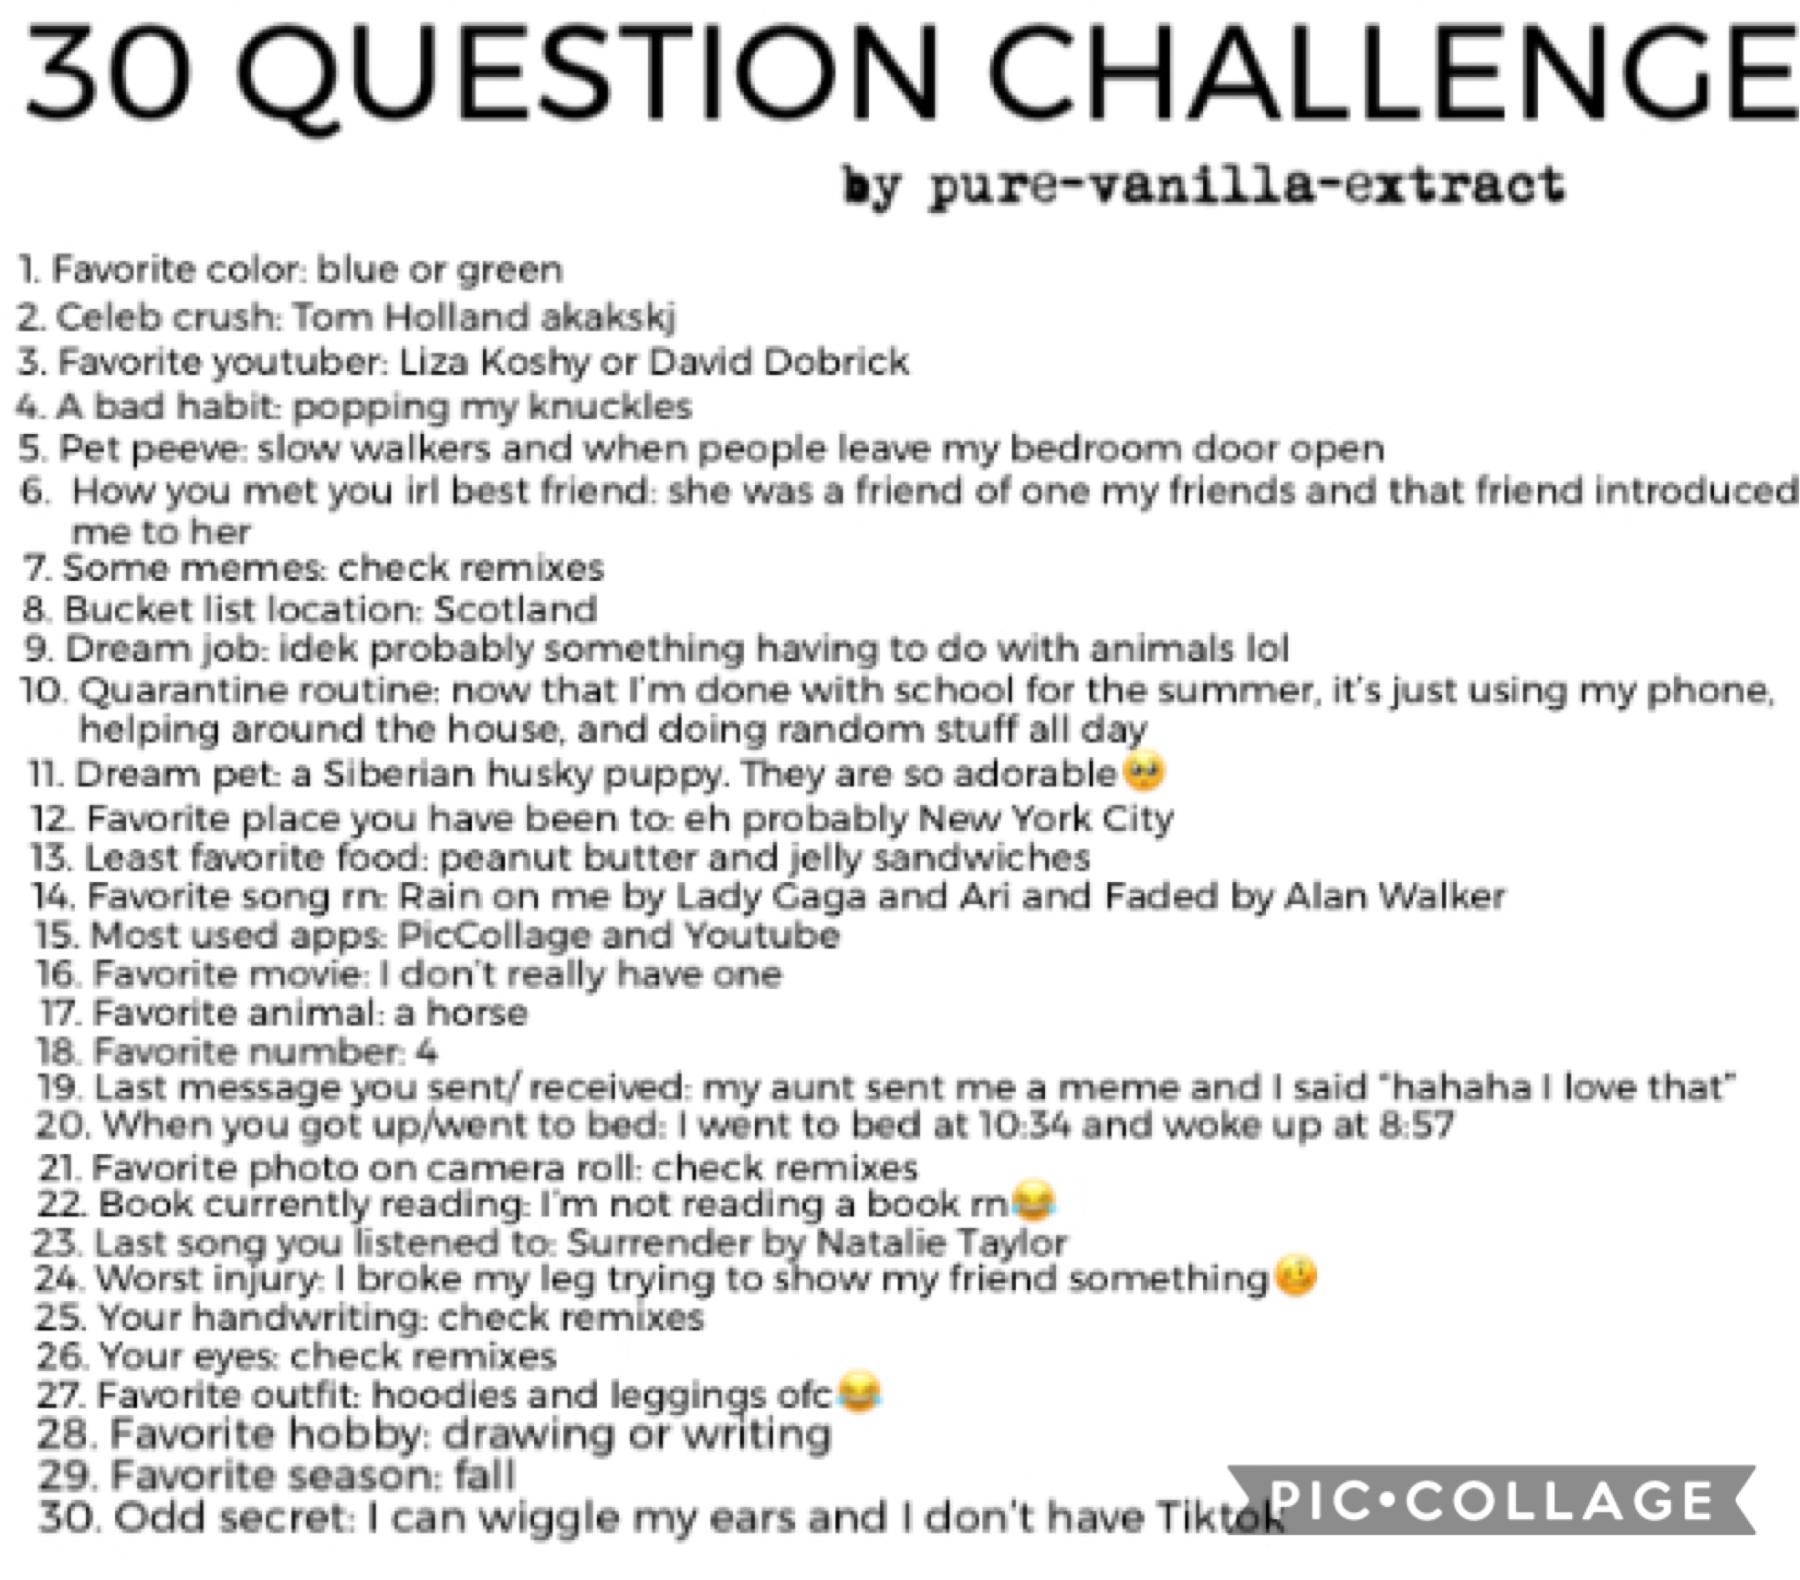 This was supposed to be a thirty day challenge, but I shortened it by answering all the questions in one day😂
aNyWaY
😌
Check remixes 